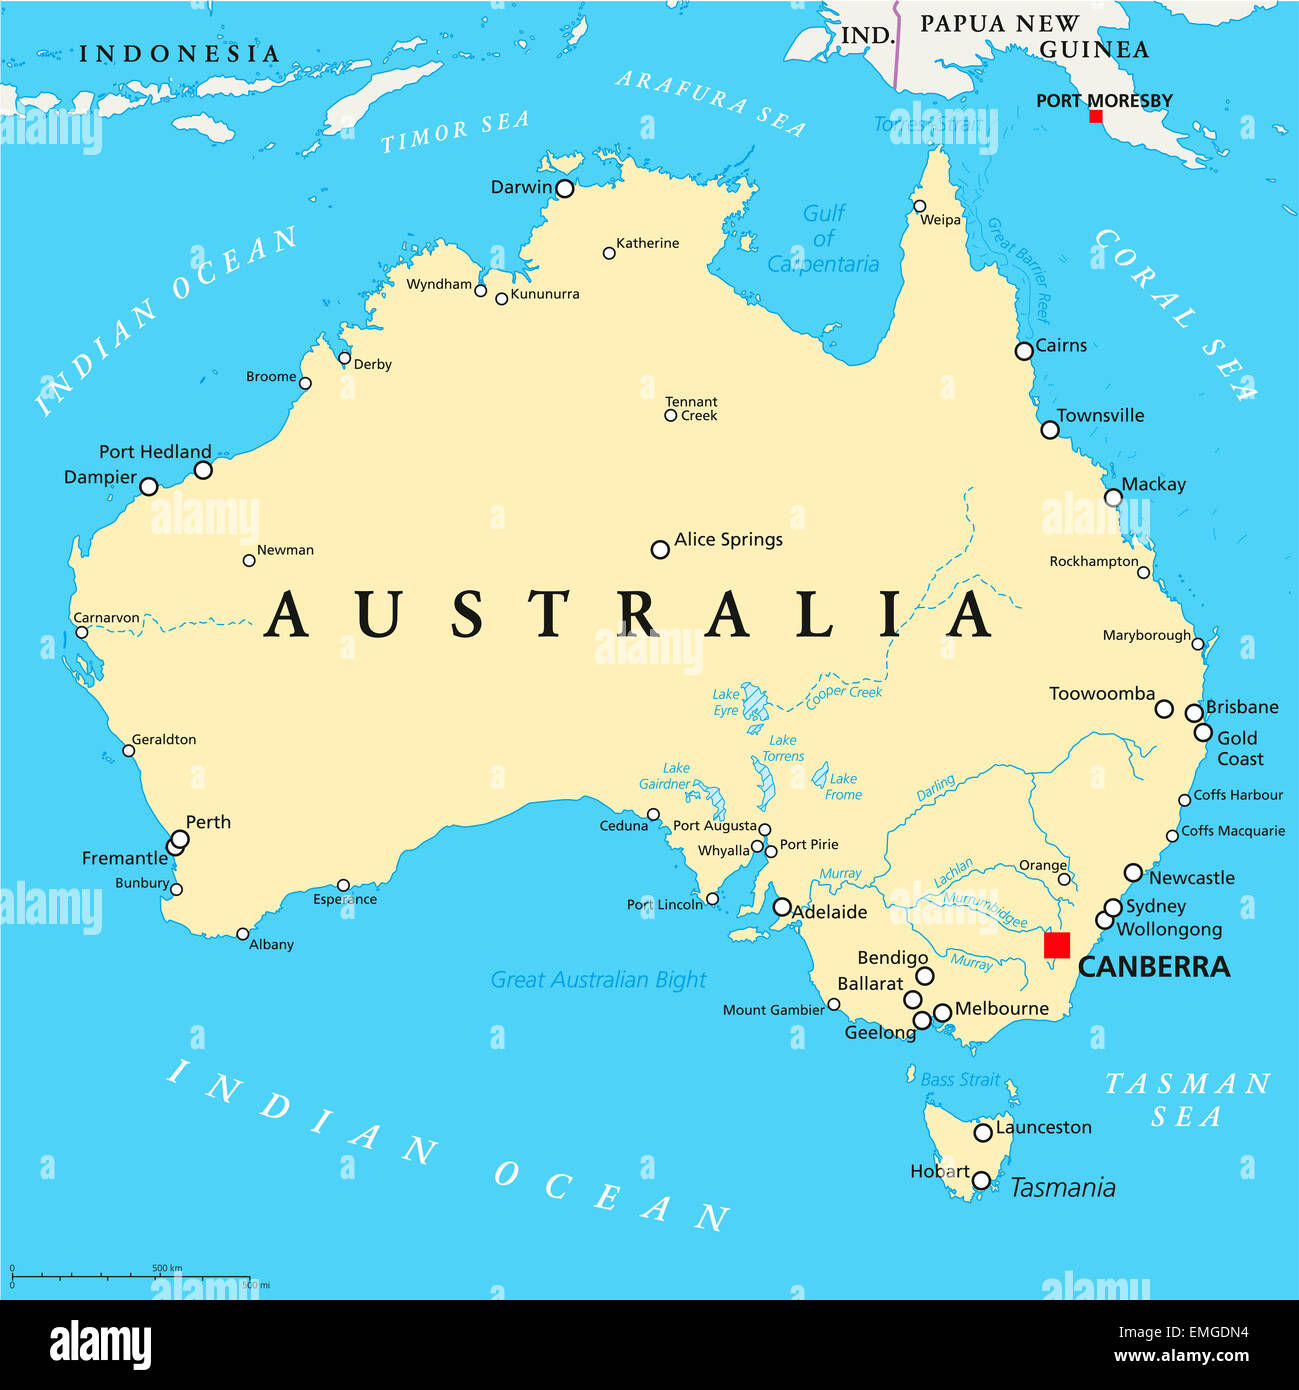 Australia Political Map with capital Canberra, national borders, important cities, rivers and lakes. English labeling. Stock Photo